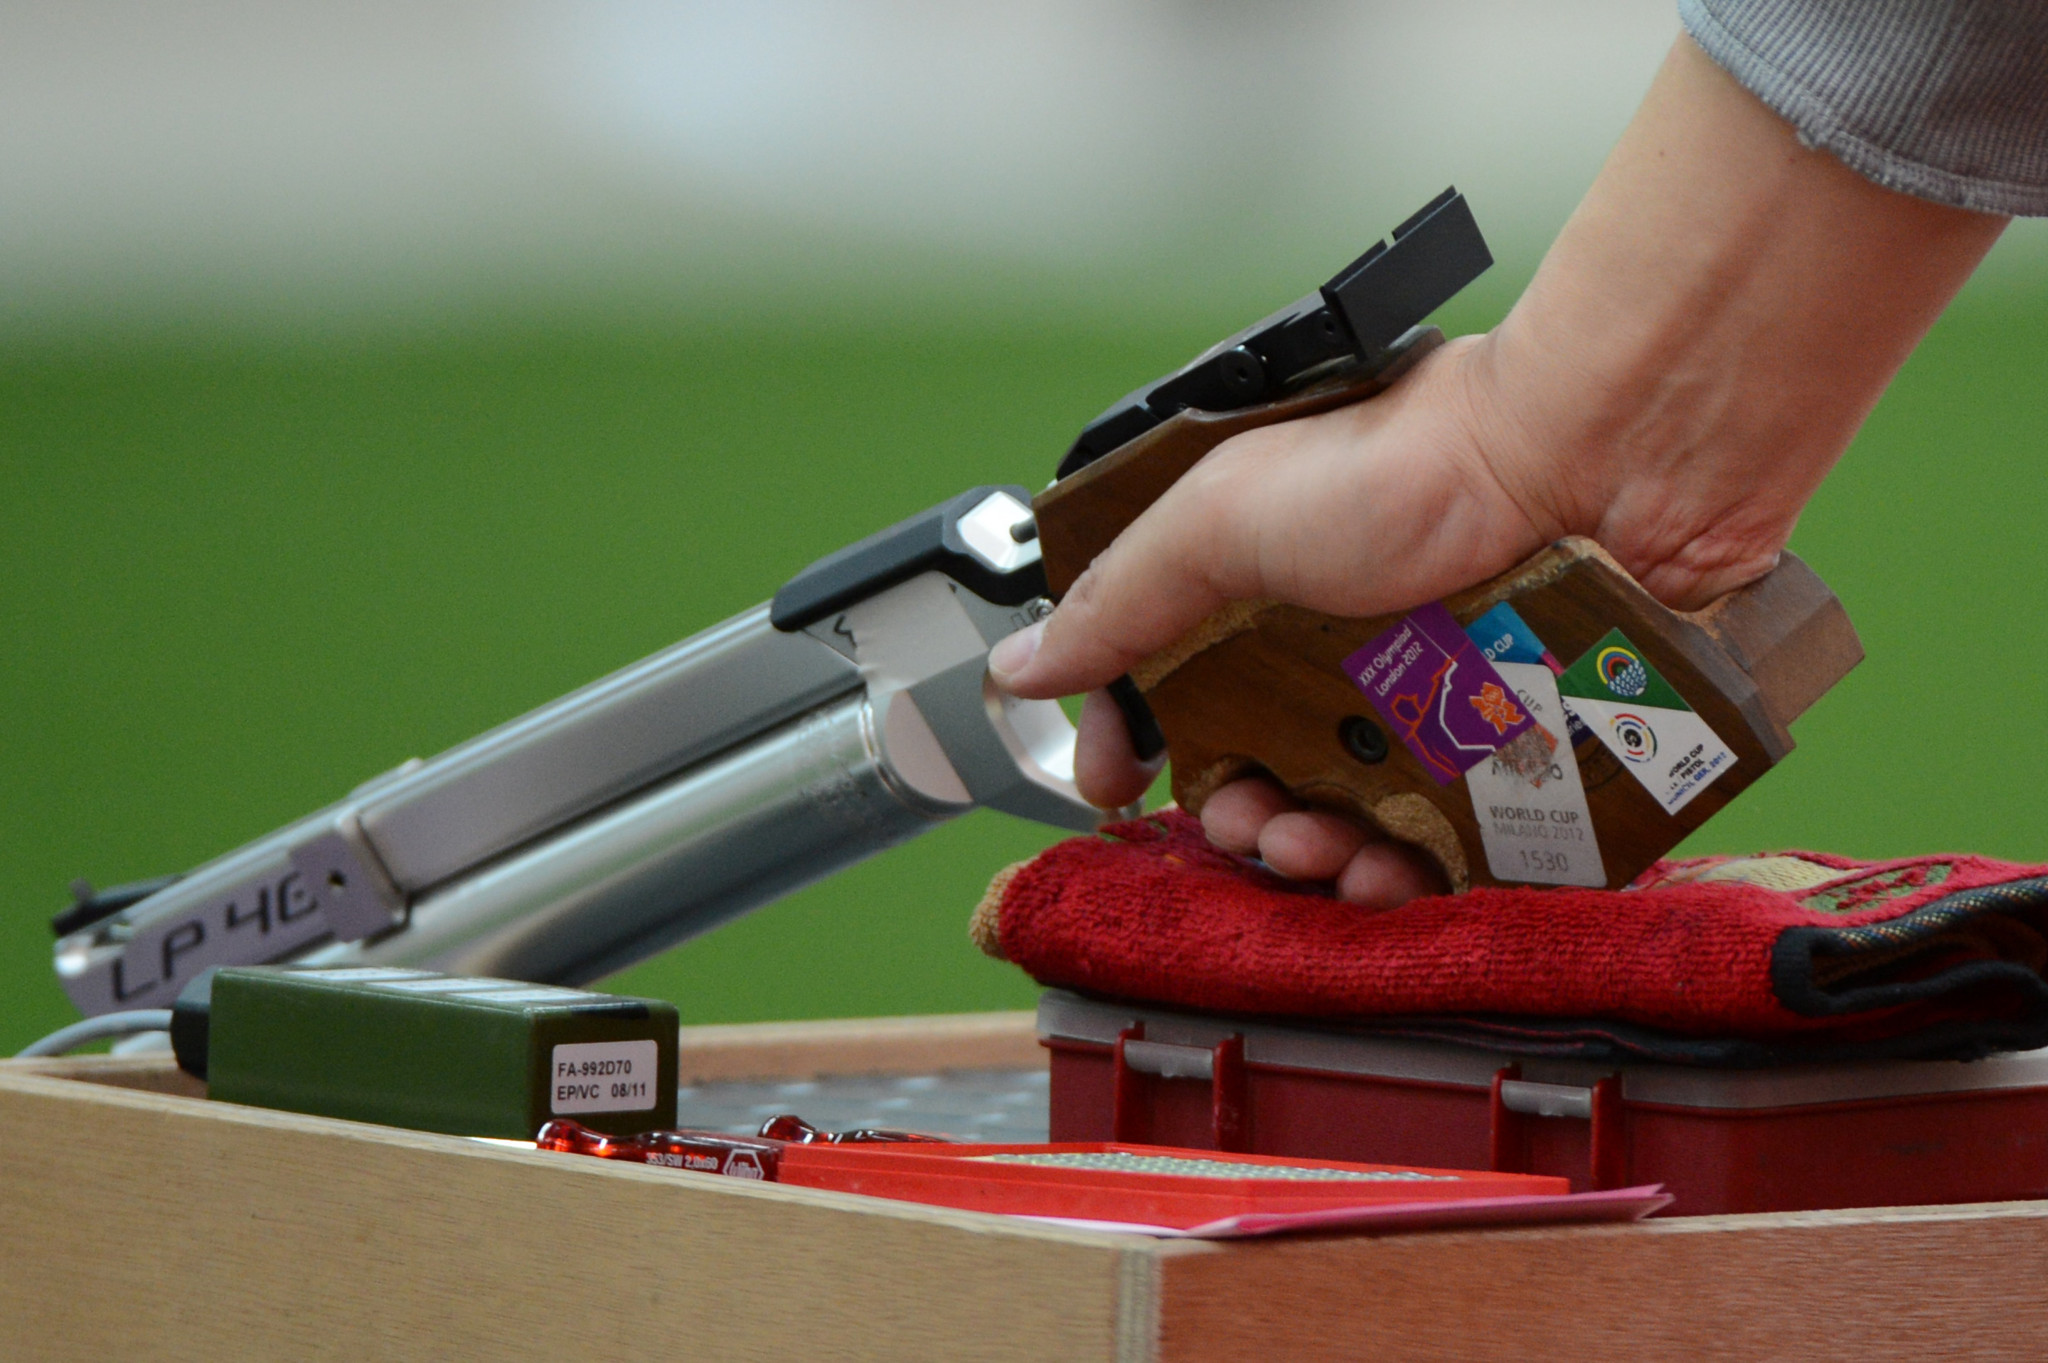 The 10 metre European Shooting Championships began today in Hamar with individual junior golds decided in air pistol and air rifle categories ©Getty Images